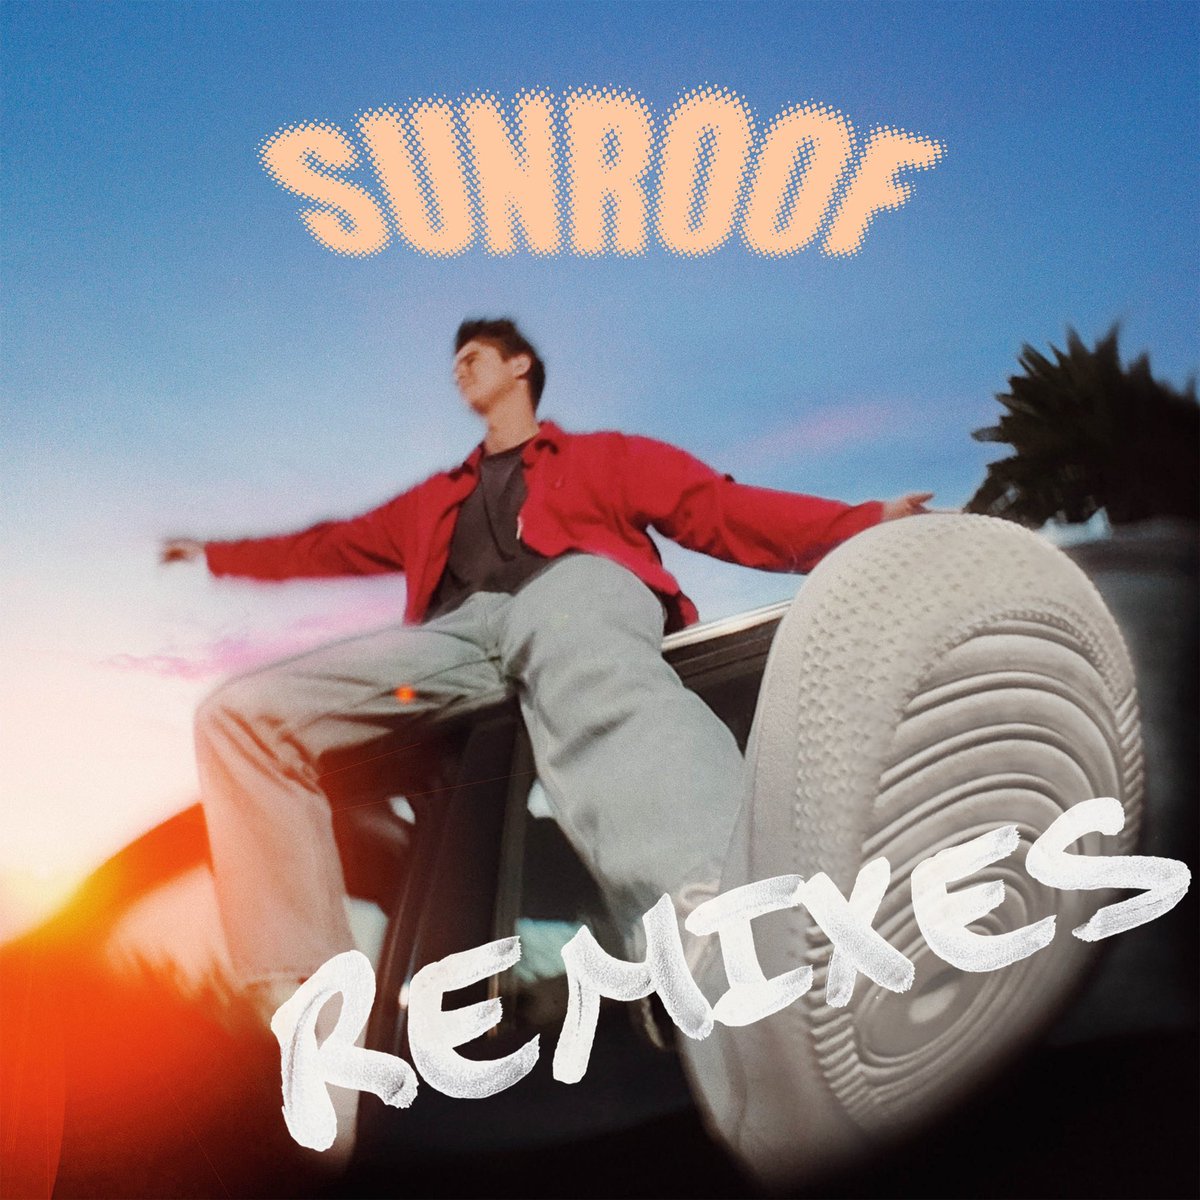 The five Sunroof Remixes are out! Click the link below to hear Thomas Rhett, Loud Luxury, 24kGoldn, and Manuel Turizo’s new versions of my song <3 nickyyoure.lnk.to/SunroofRemixes